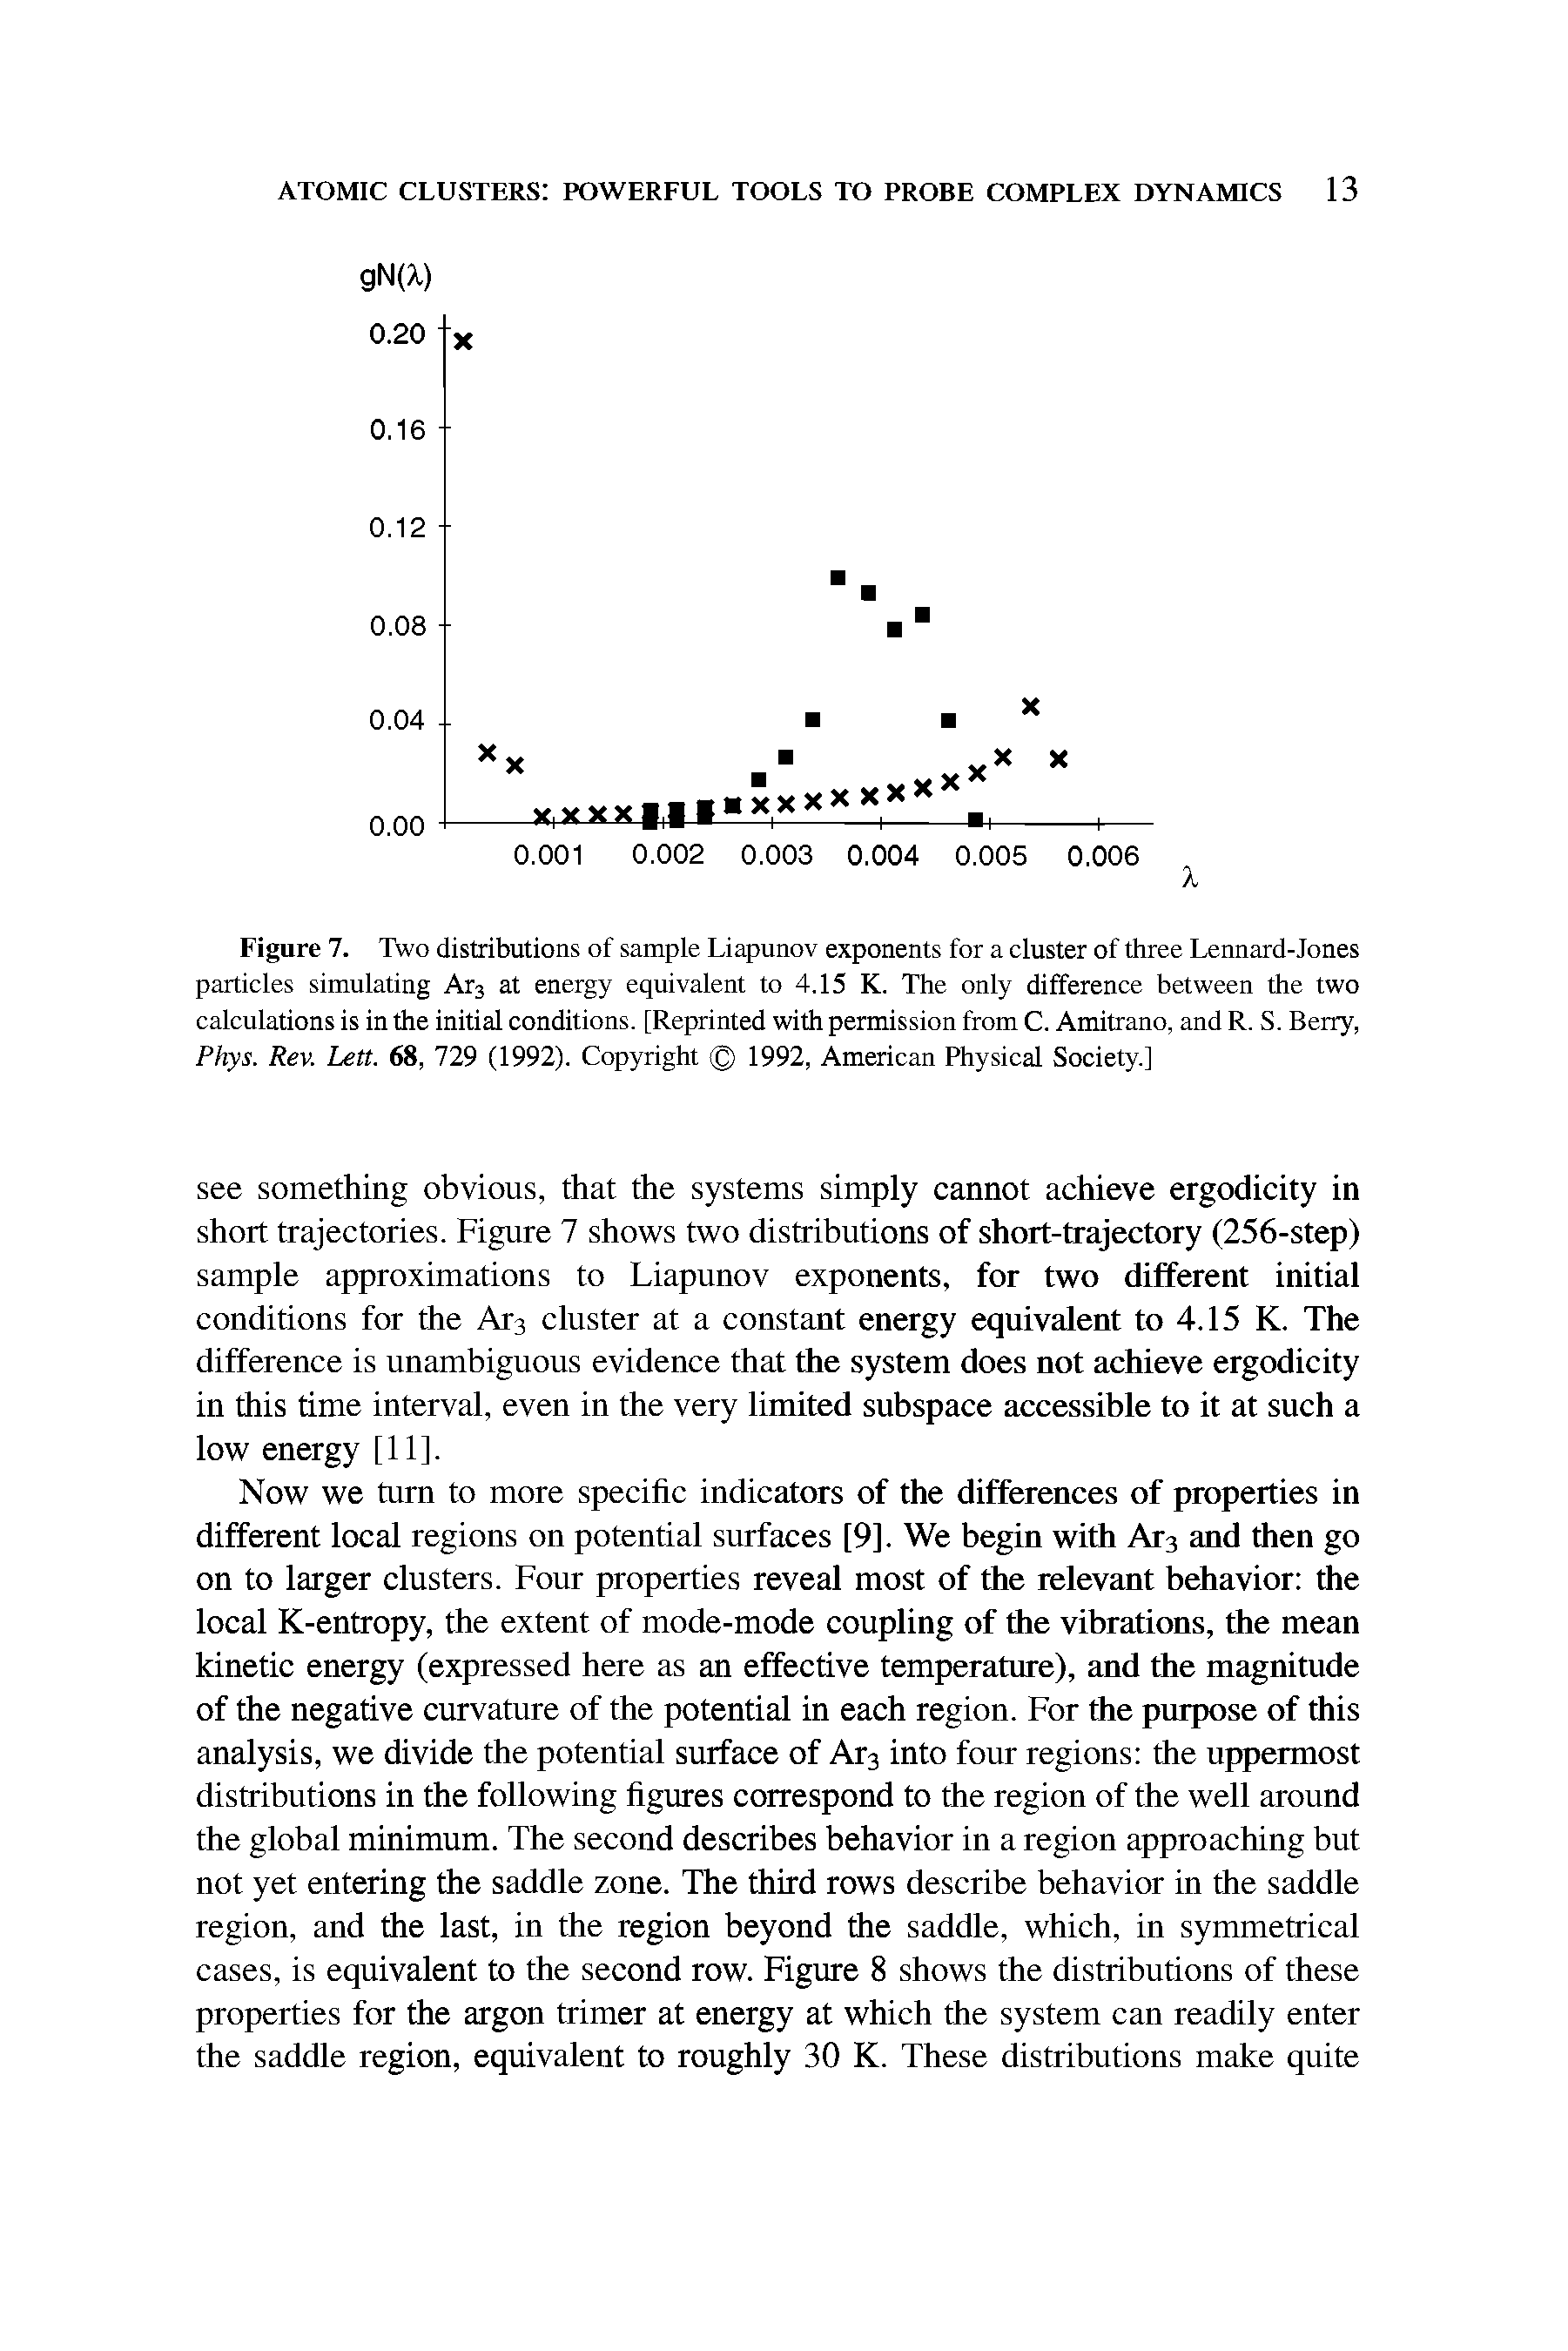 Figure 7. Two distributions of sample Liapunov exponents for a cluster of three Lennard-Jones particles simulating Ar3 at energy equivalent to 4.15 K. The only difference between the two calculations is in the initial conditions. [Reprinted with permission from C. Amitrano, and R. S. Berry, Phys. Rev. Lett. 68, 729 (1992). Copyright 1992, American Physical Society.]...